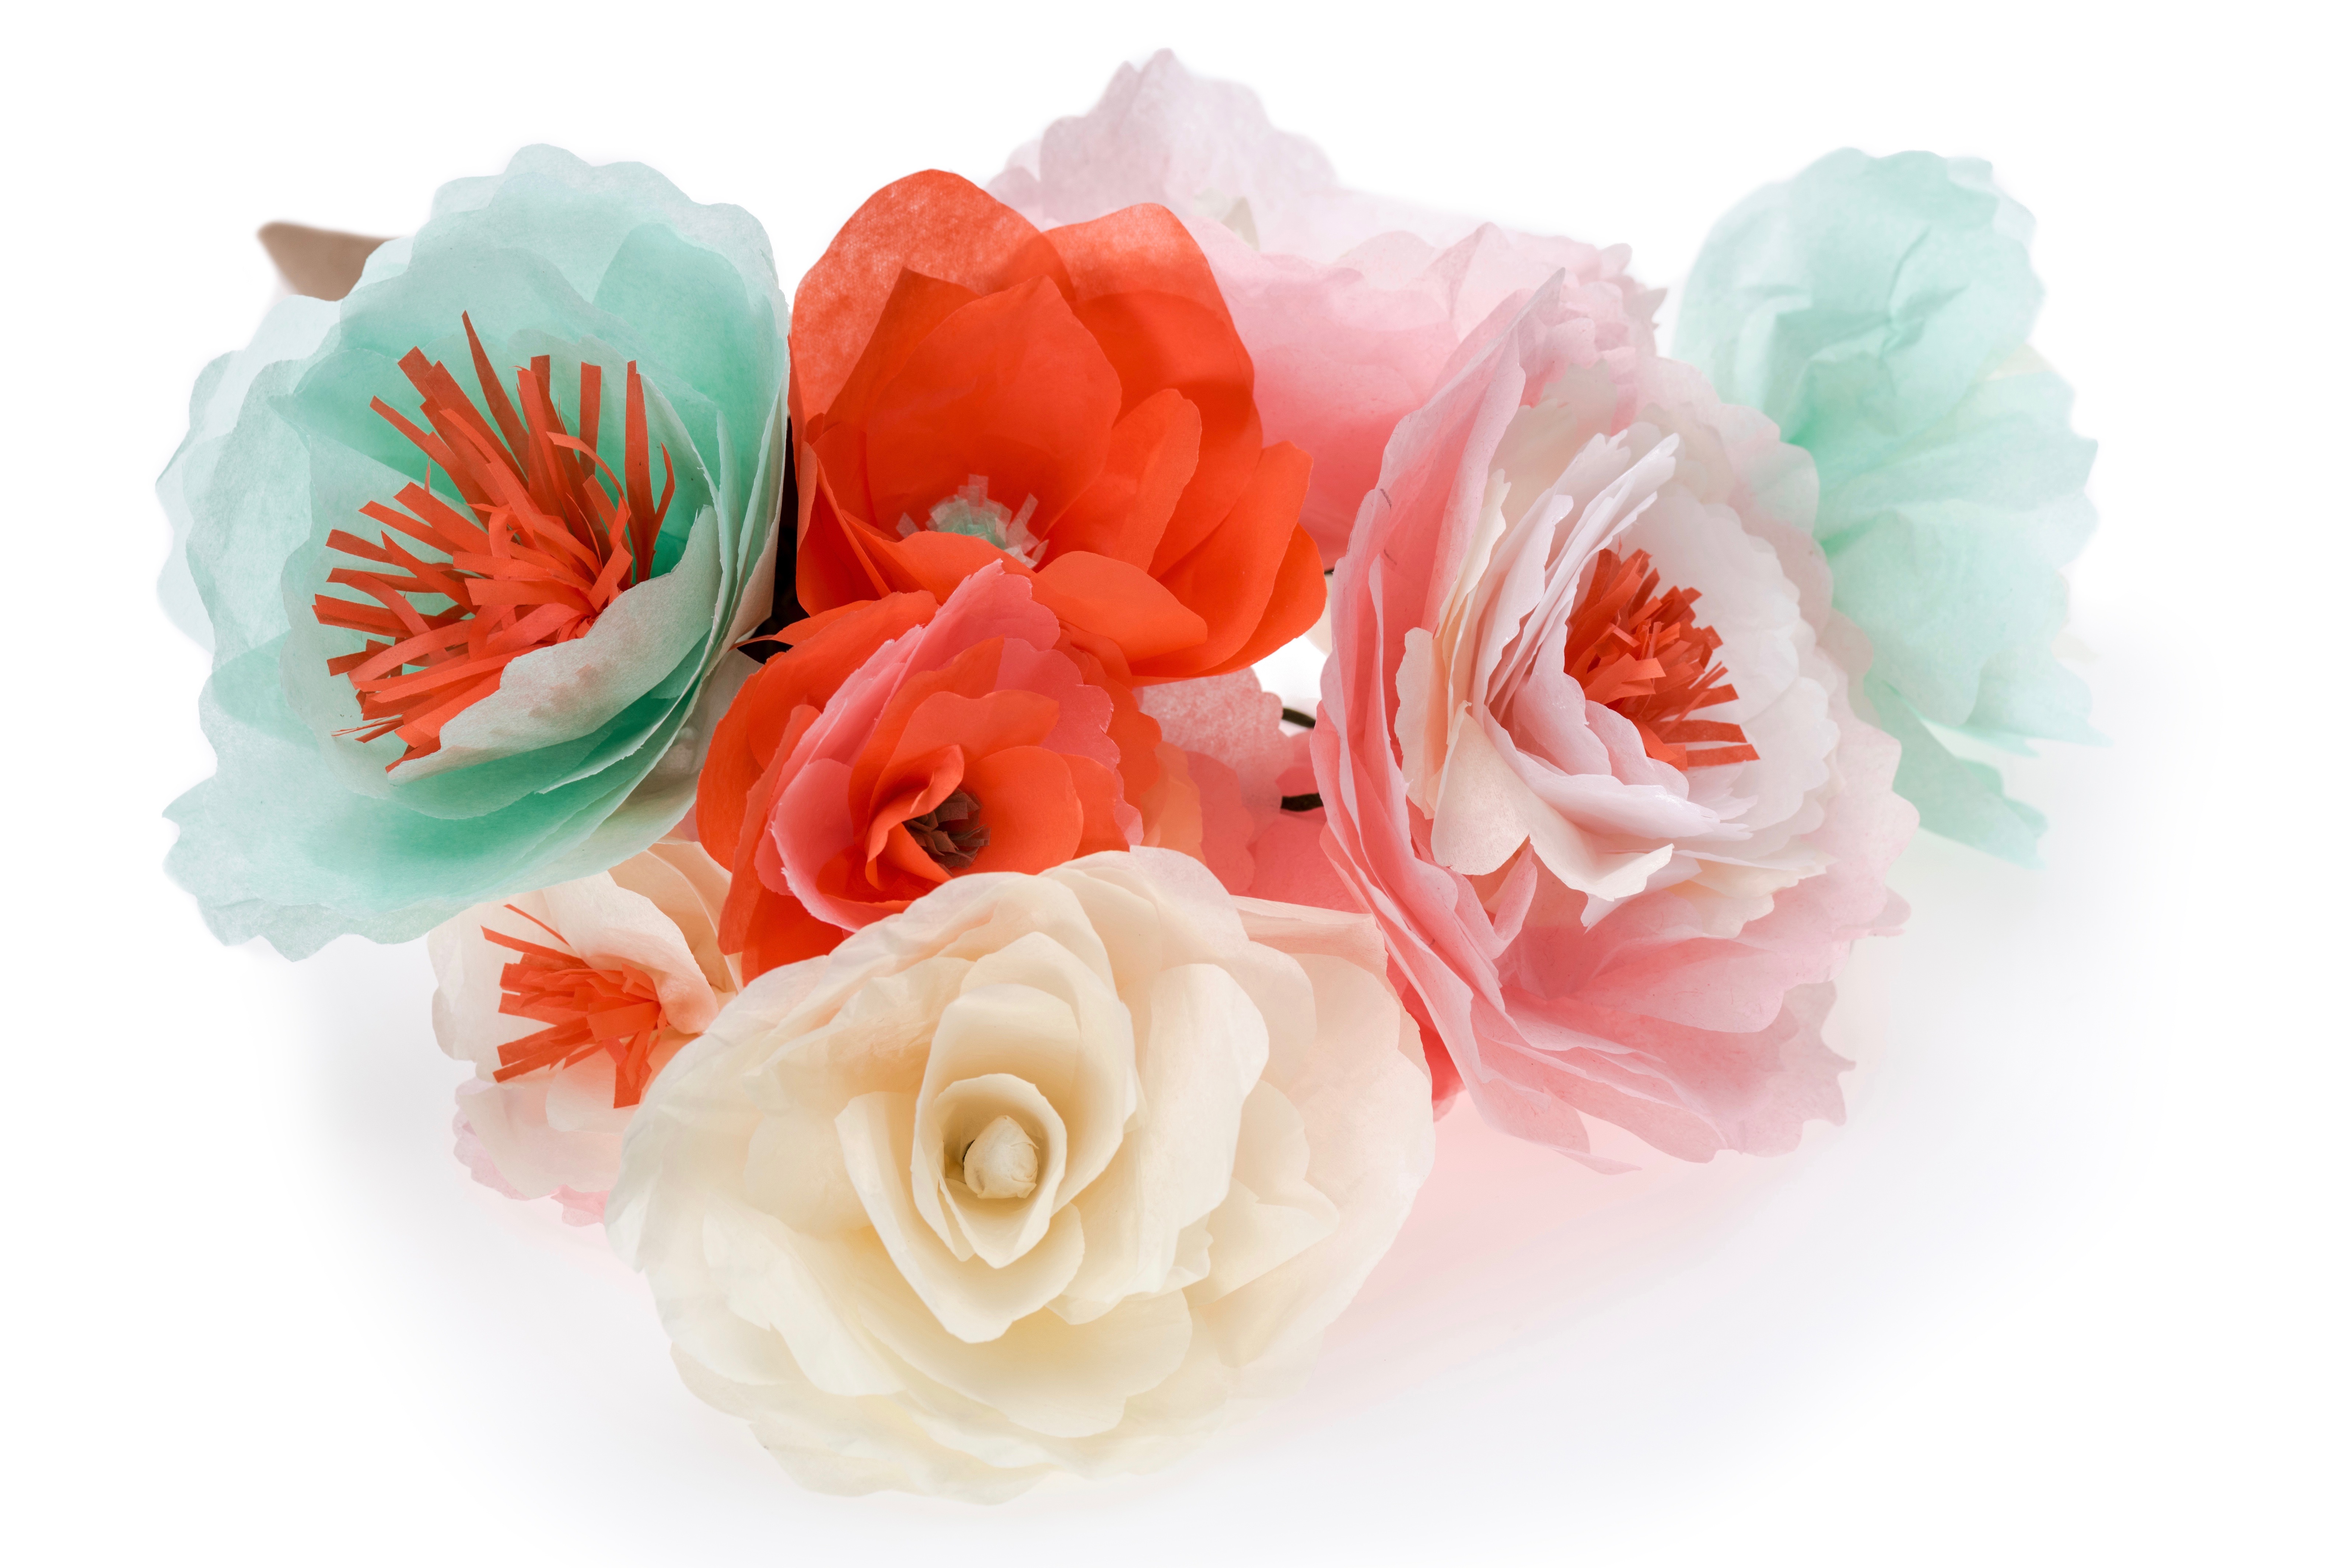 close up view of colorful decorative handmade flowers isolated on white